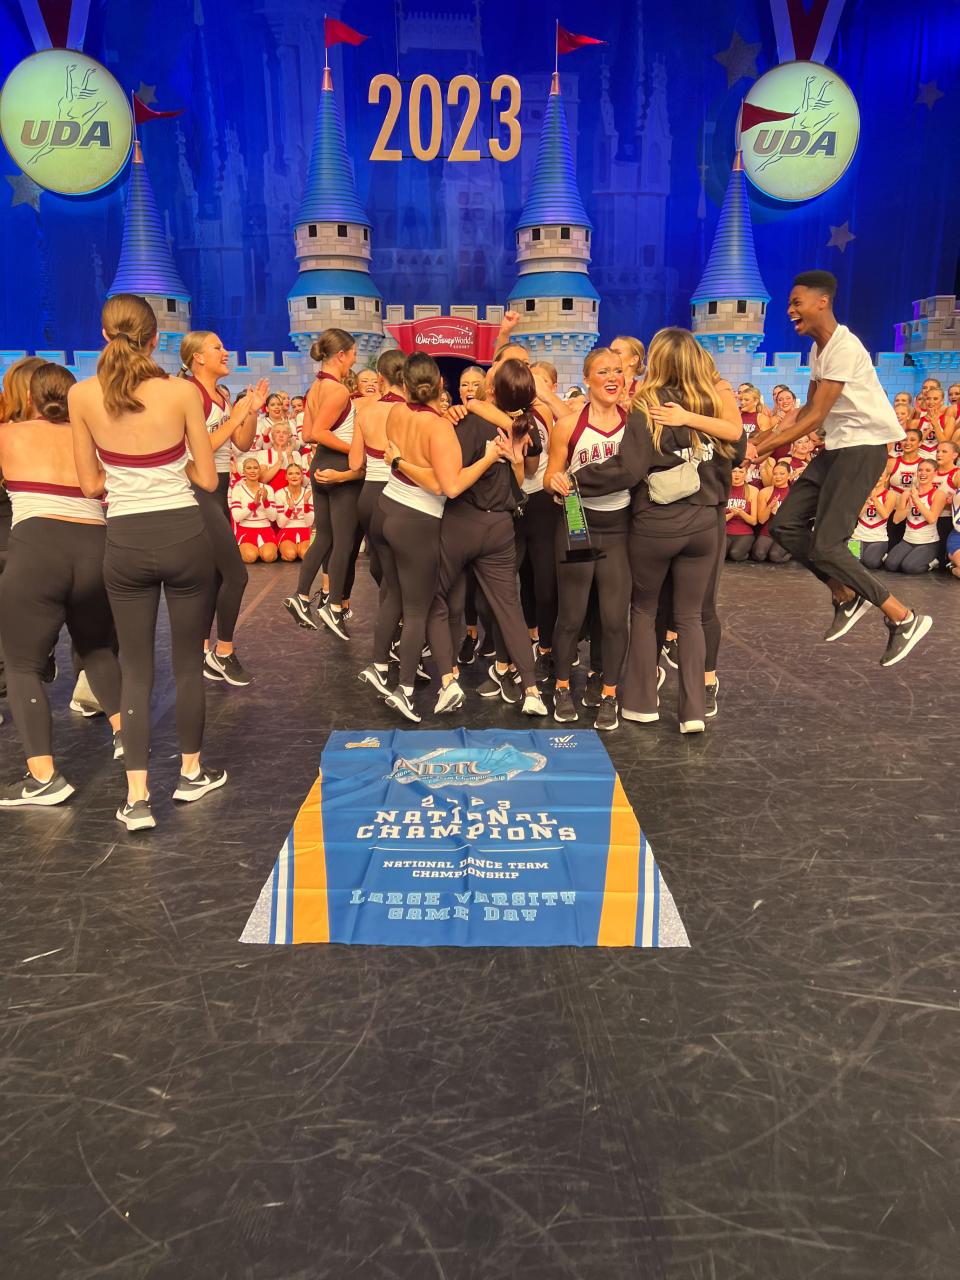 Bearden High School Dance Team took home the first-place trophy in the Large Varsity Game Day division during the Universal Dance Association (UDA) National Dance Team Championships, held in Orlando from February 3-5, 2023.